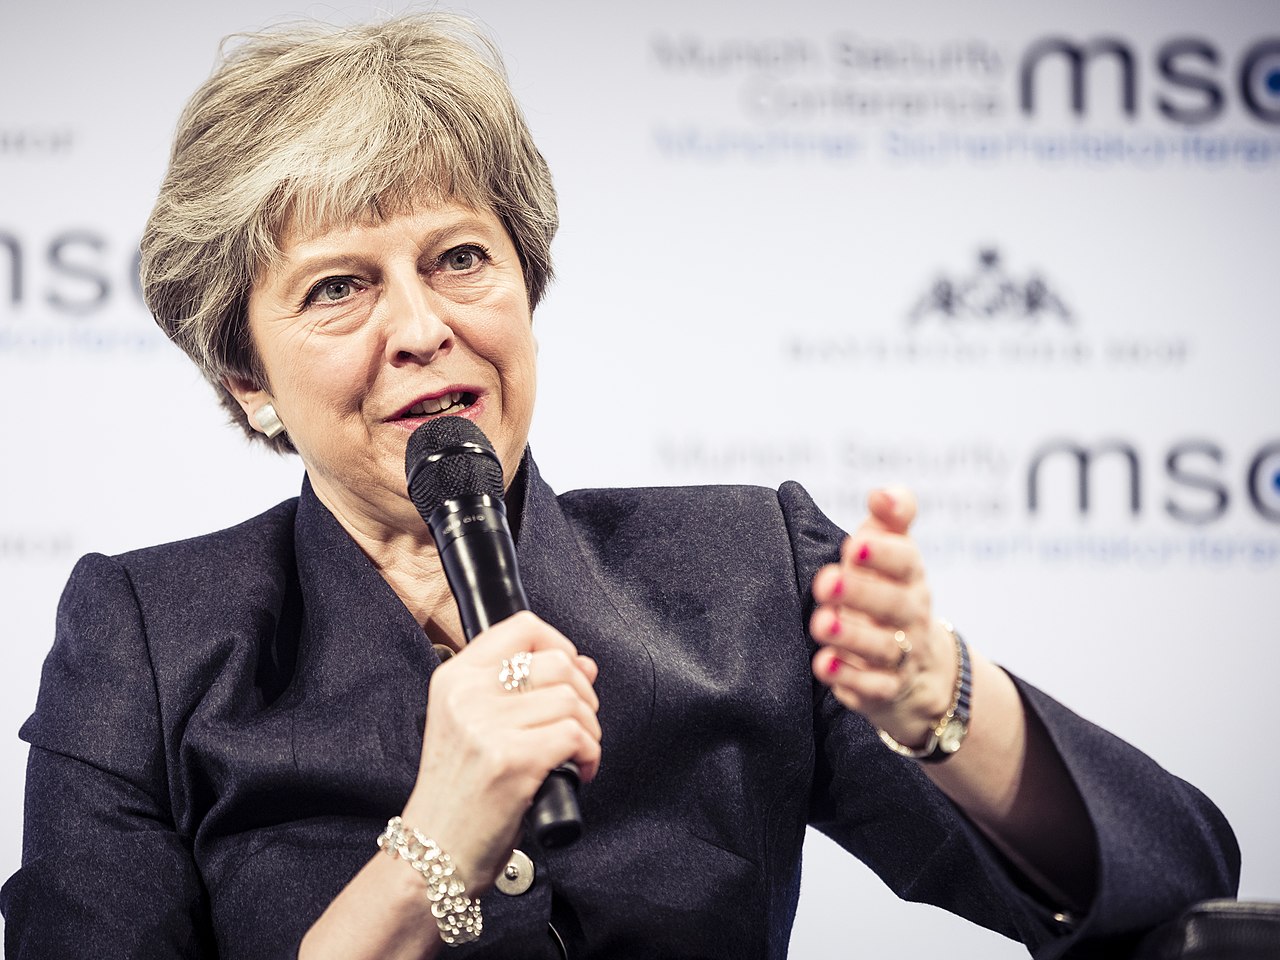 Theresa_May_MSC_2018_(cropped) By Kuhlmann _ MSC - CC BY 3.0